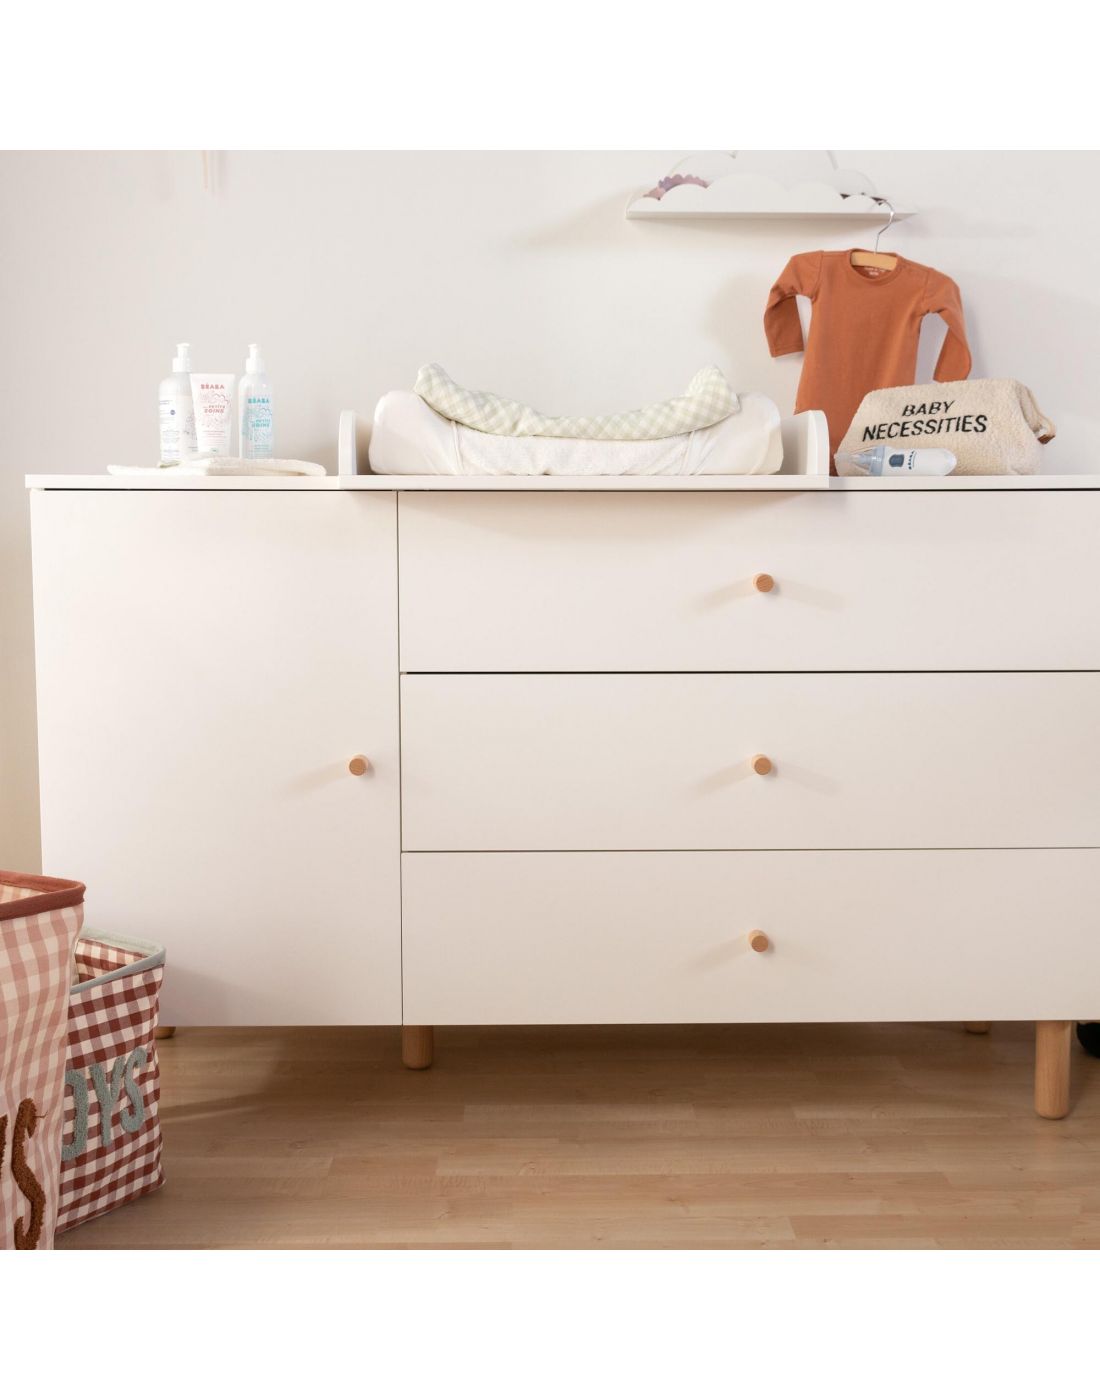 Childhome Kids Wonder White Chest with 3 Drawers & 1 Door & Changing Unit